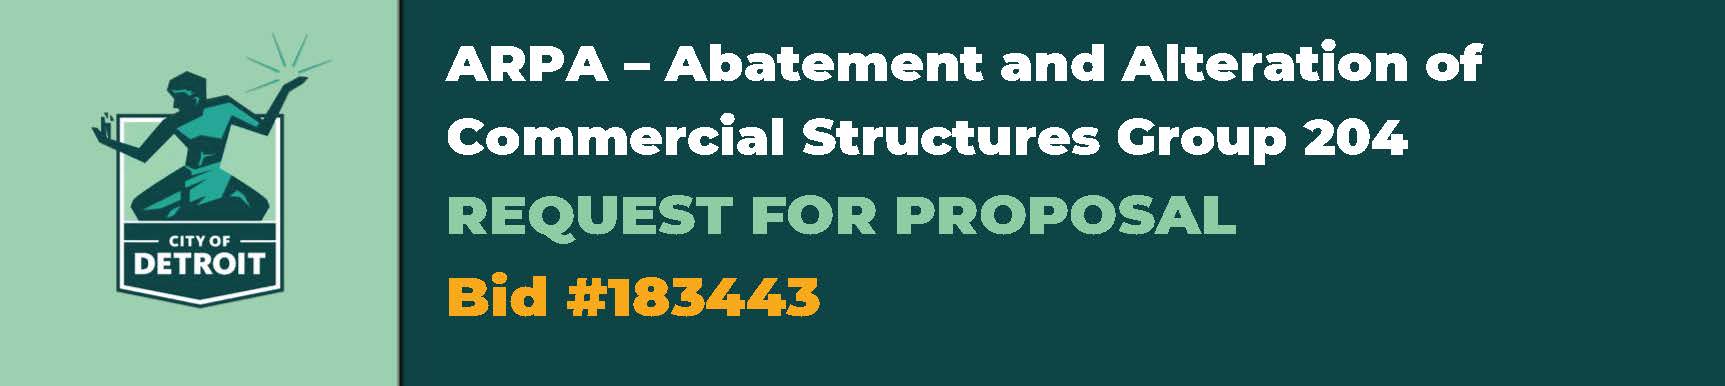 ARPA – Abatement and Alteration of Commercial Structures Group 204